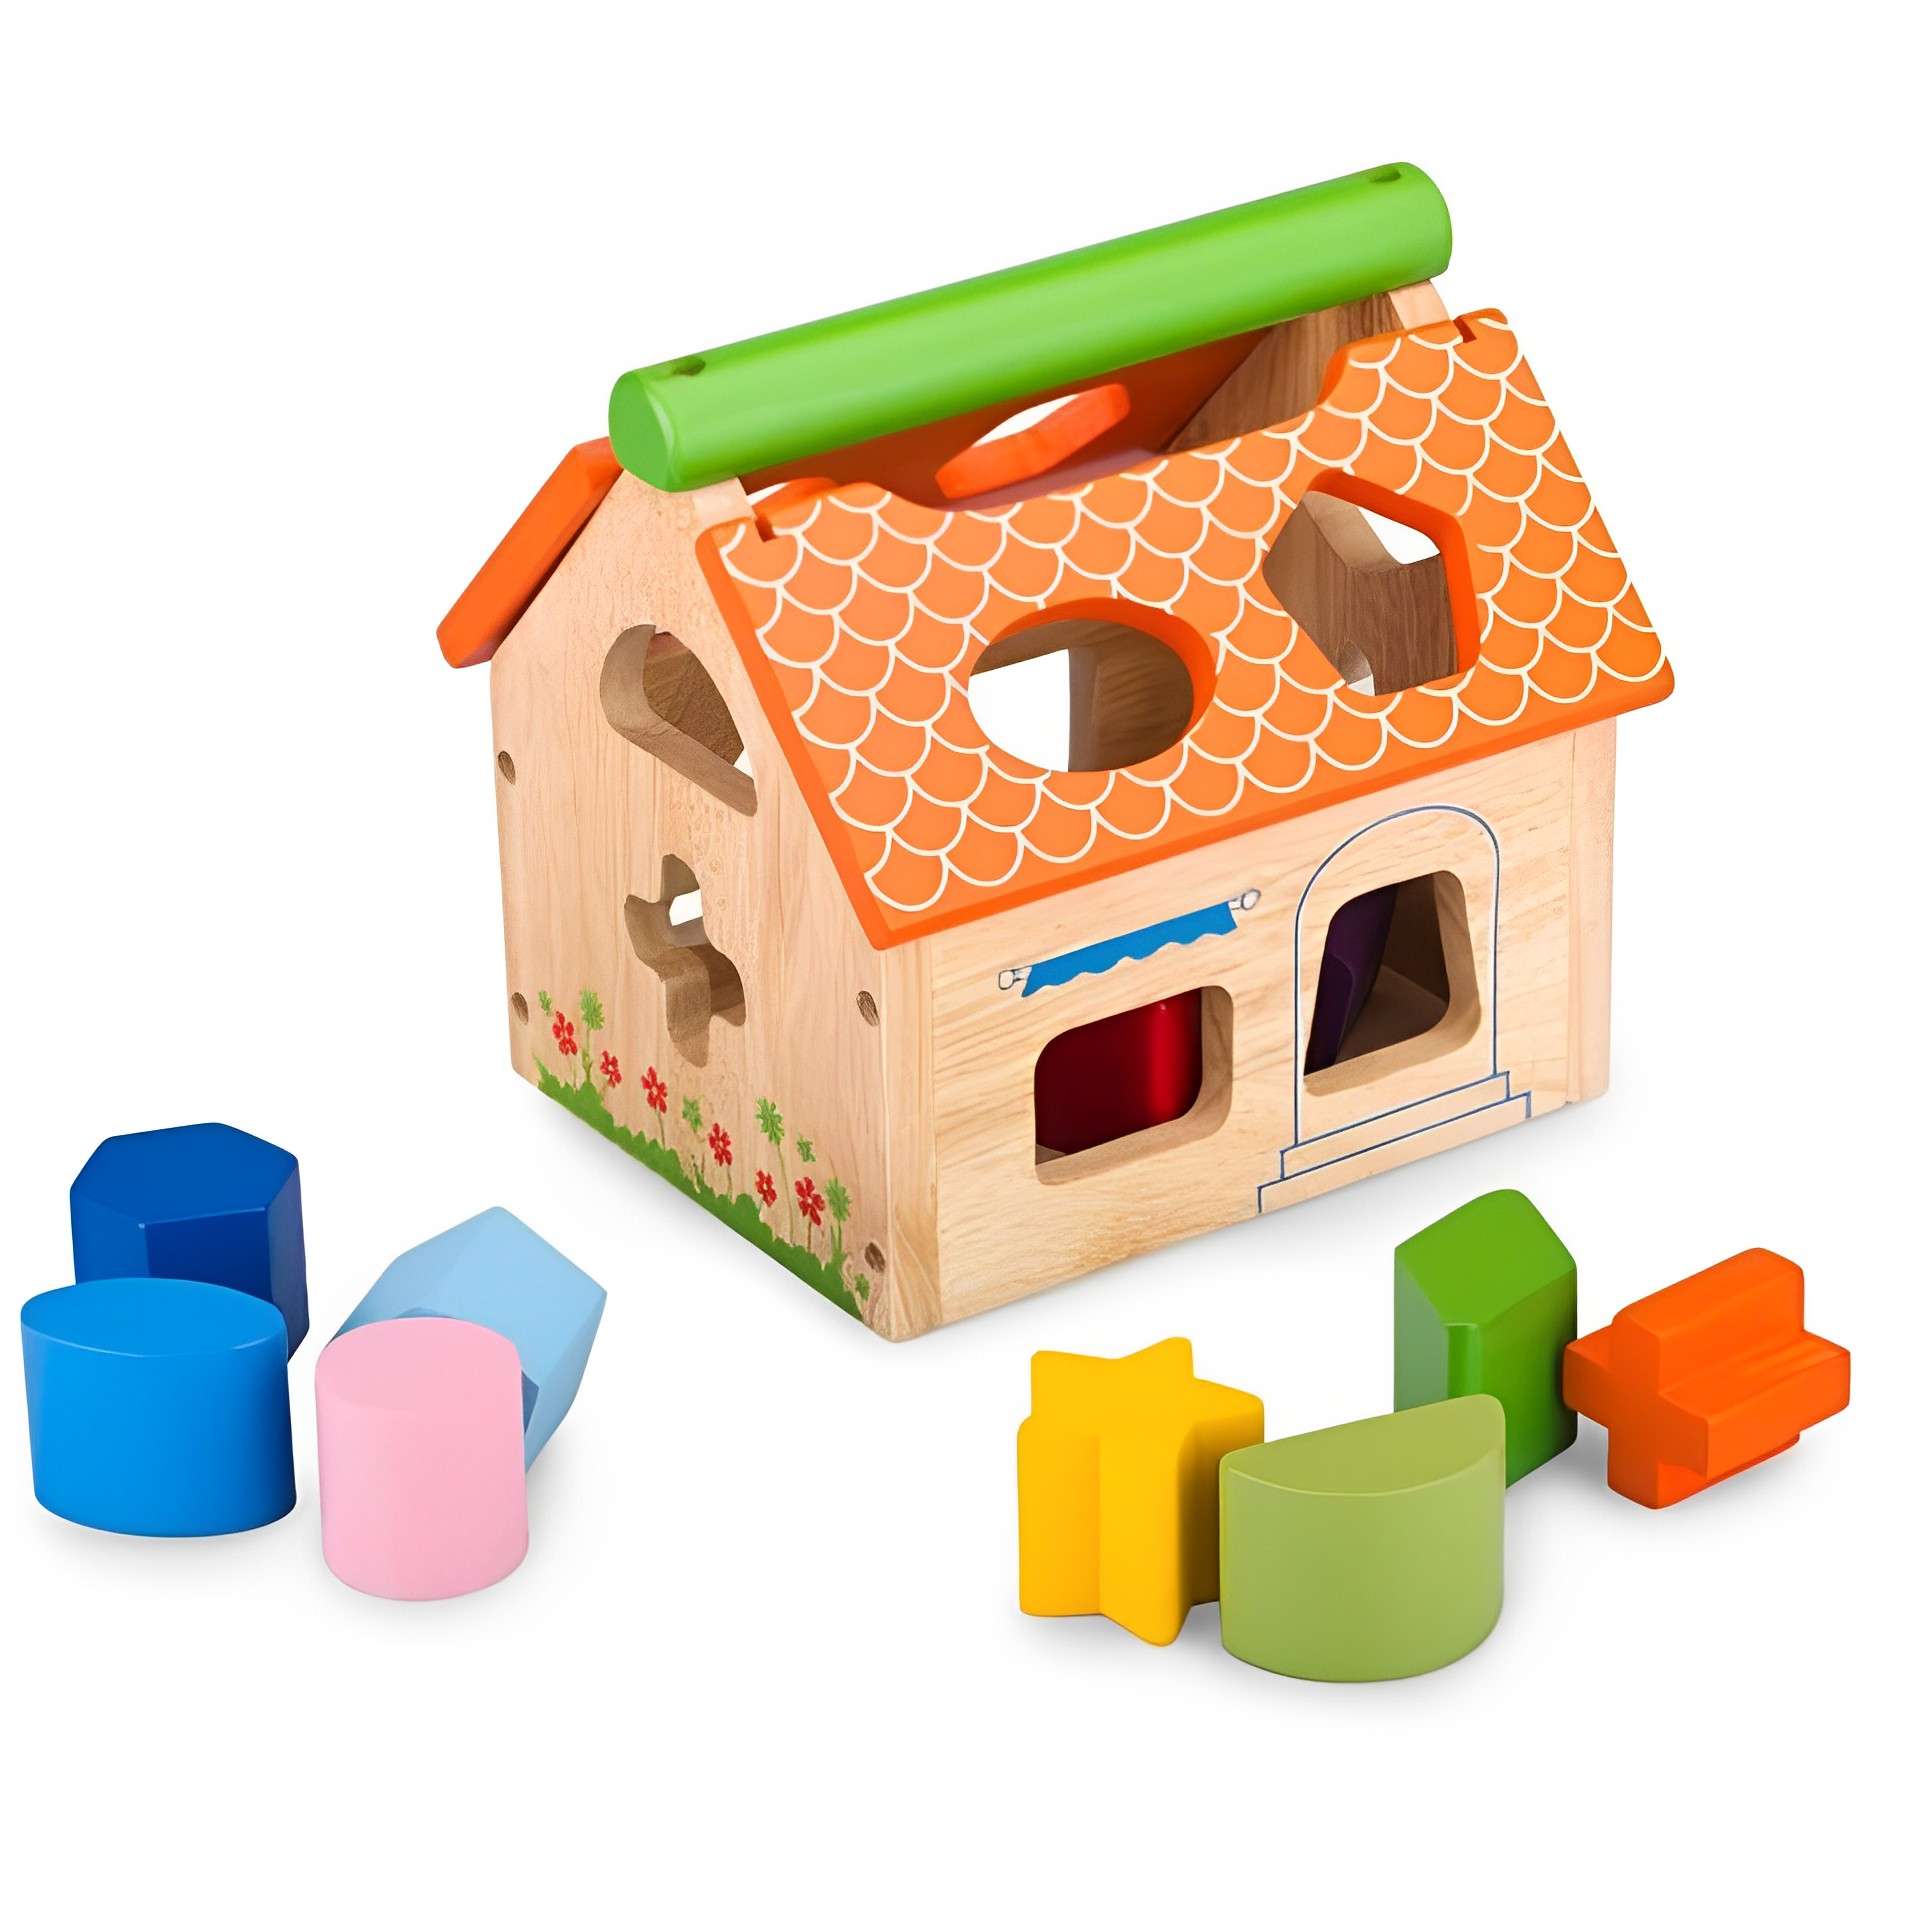 Wooden Building Block Puzzle Toy Wisdom House Educational Toys For 2 Year Olds, Montessori Wooden Toys